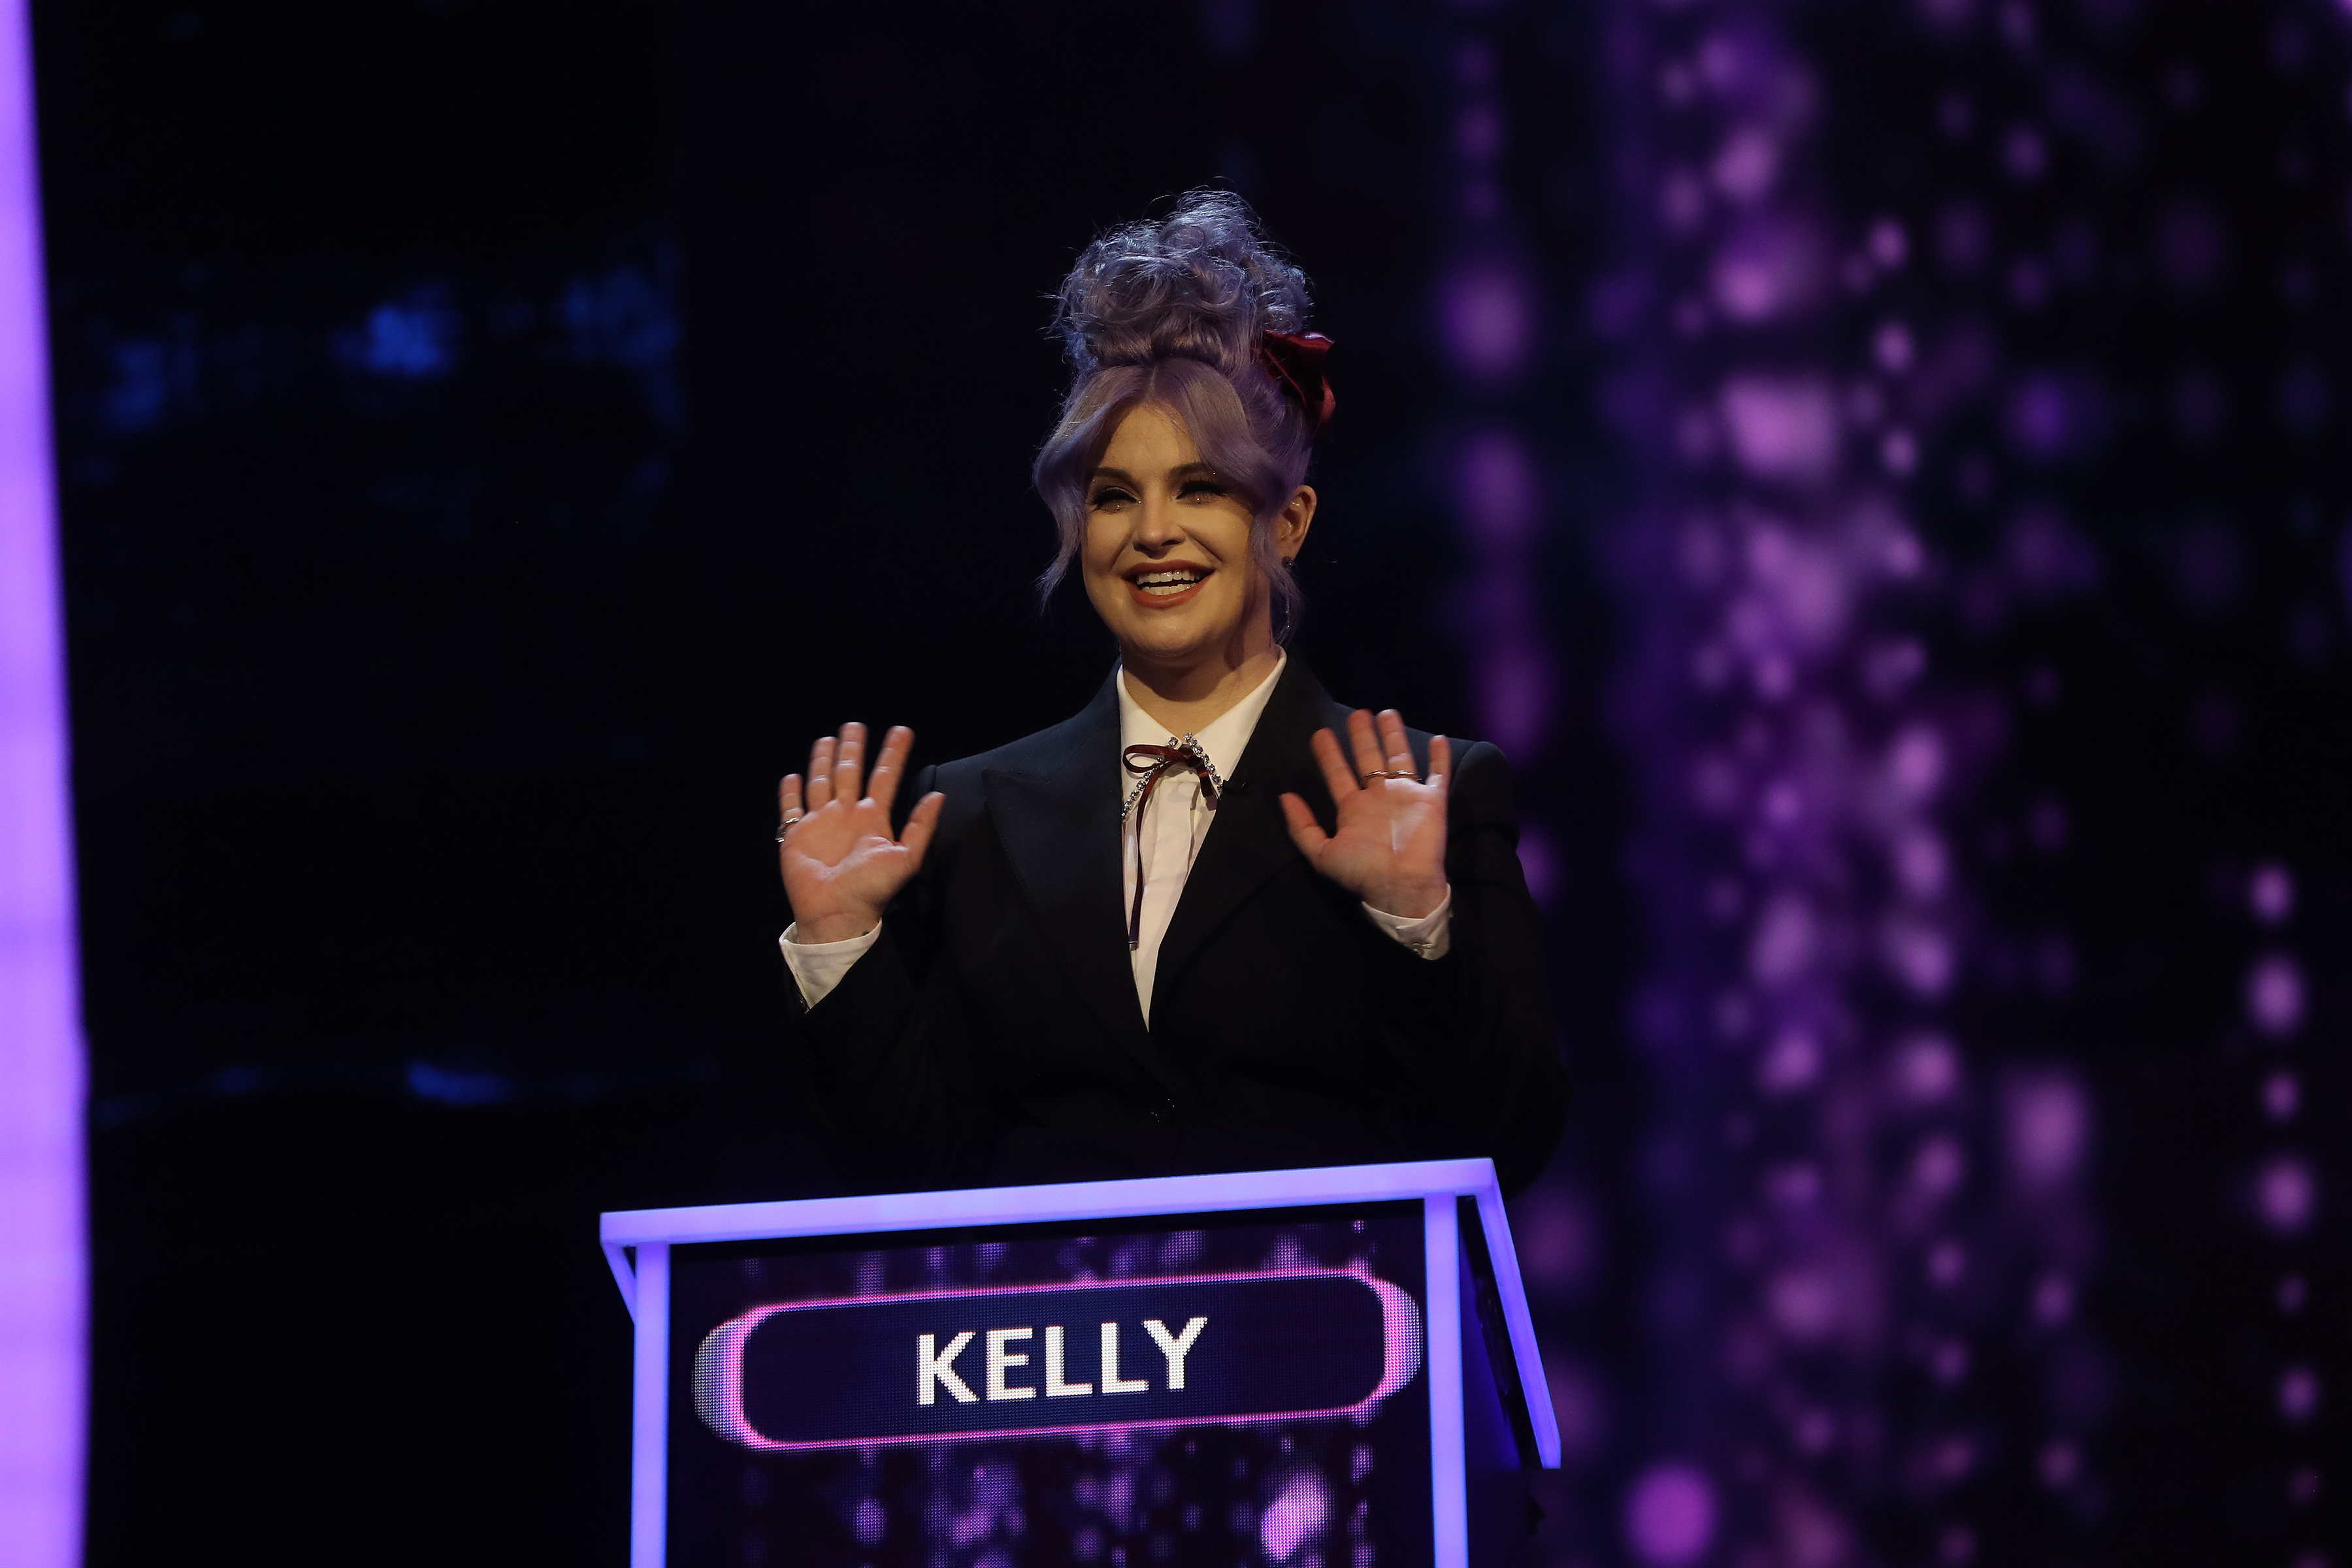 Kelly smiling and waving on a game show set standing behind a podium, dressed in a suit with a unique hairstyle